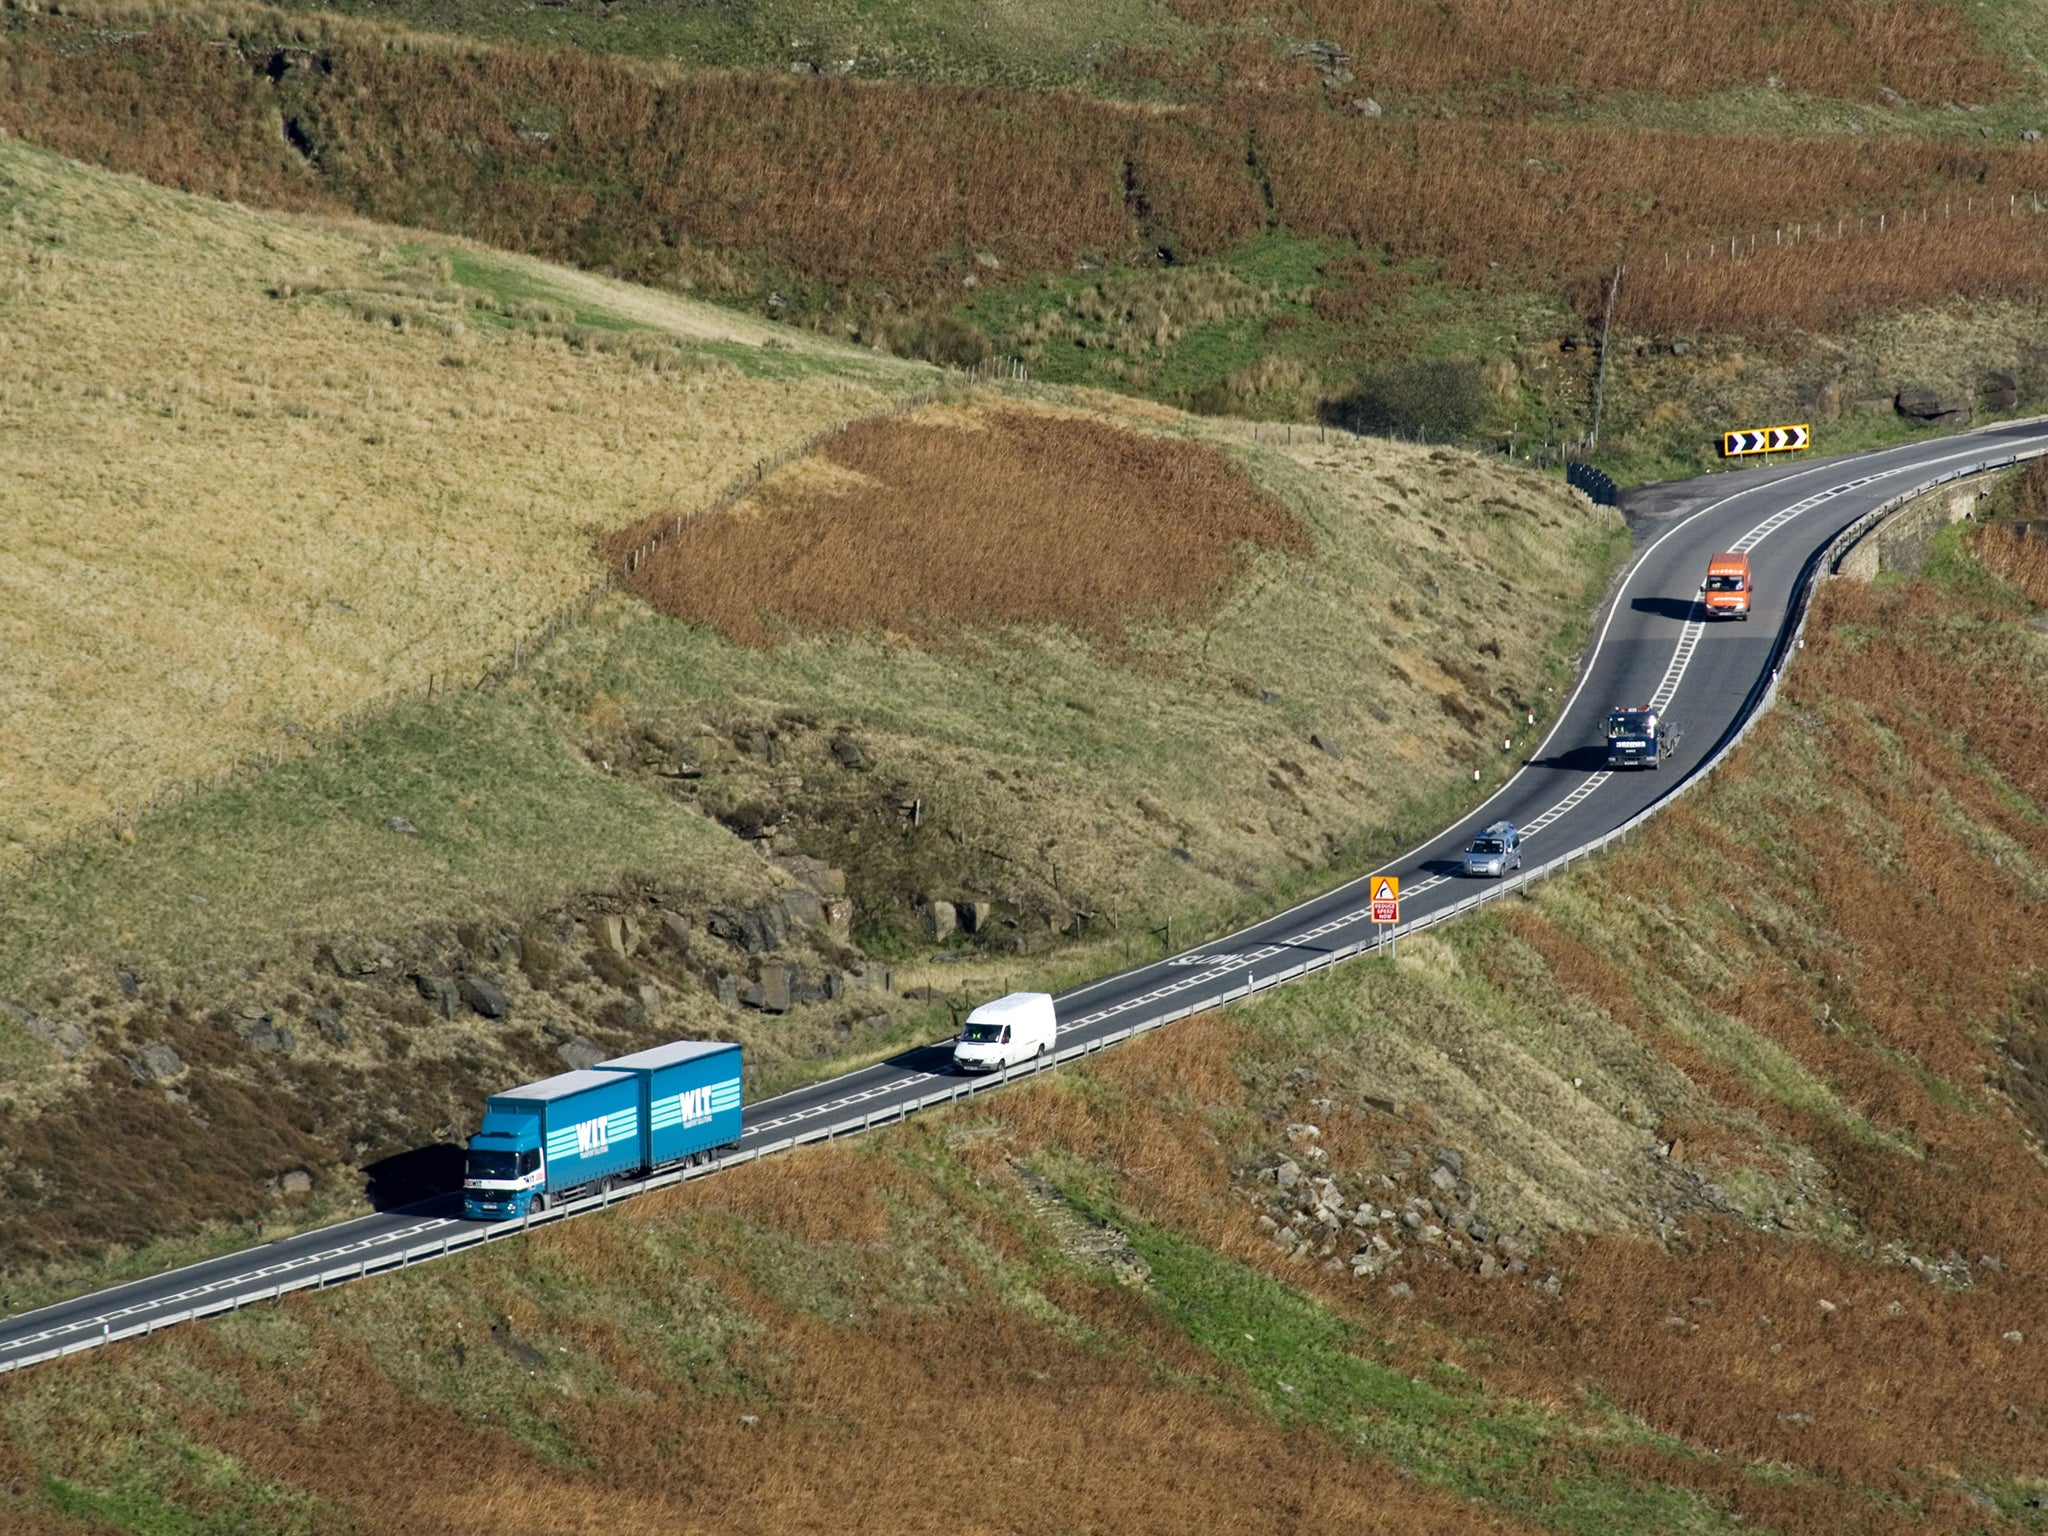 Traffic on A628 crossing the Woodhead Pass in the Longdendale Valley, Derbyshire UK